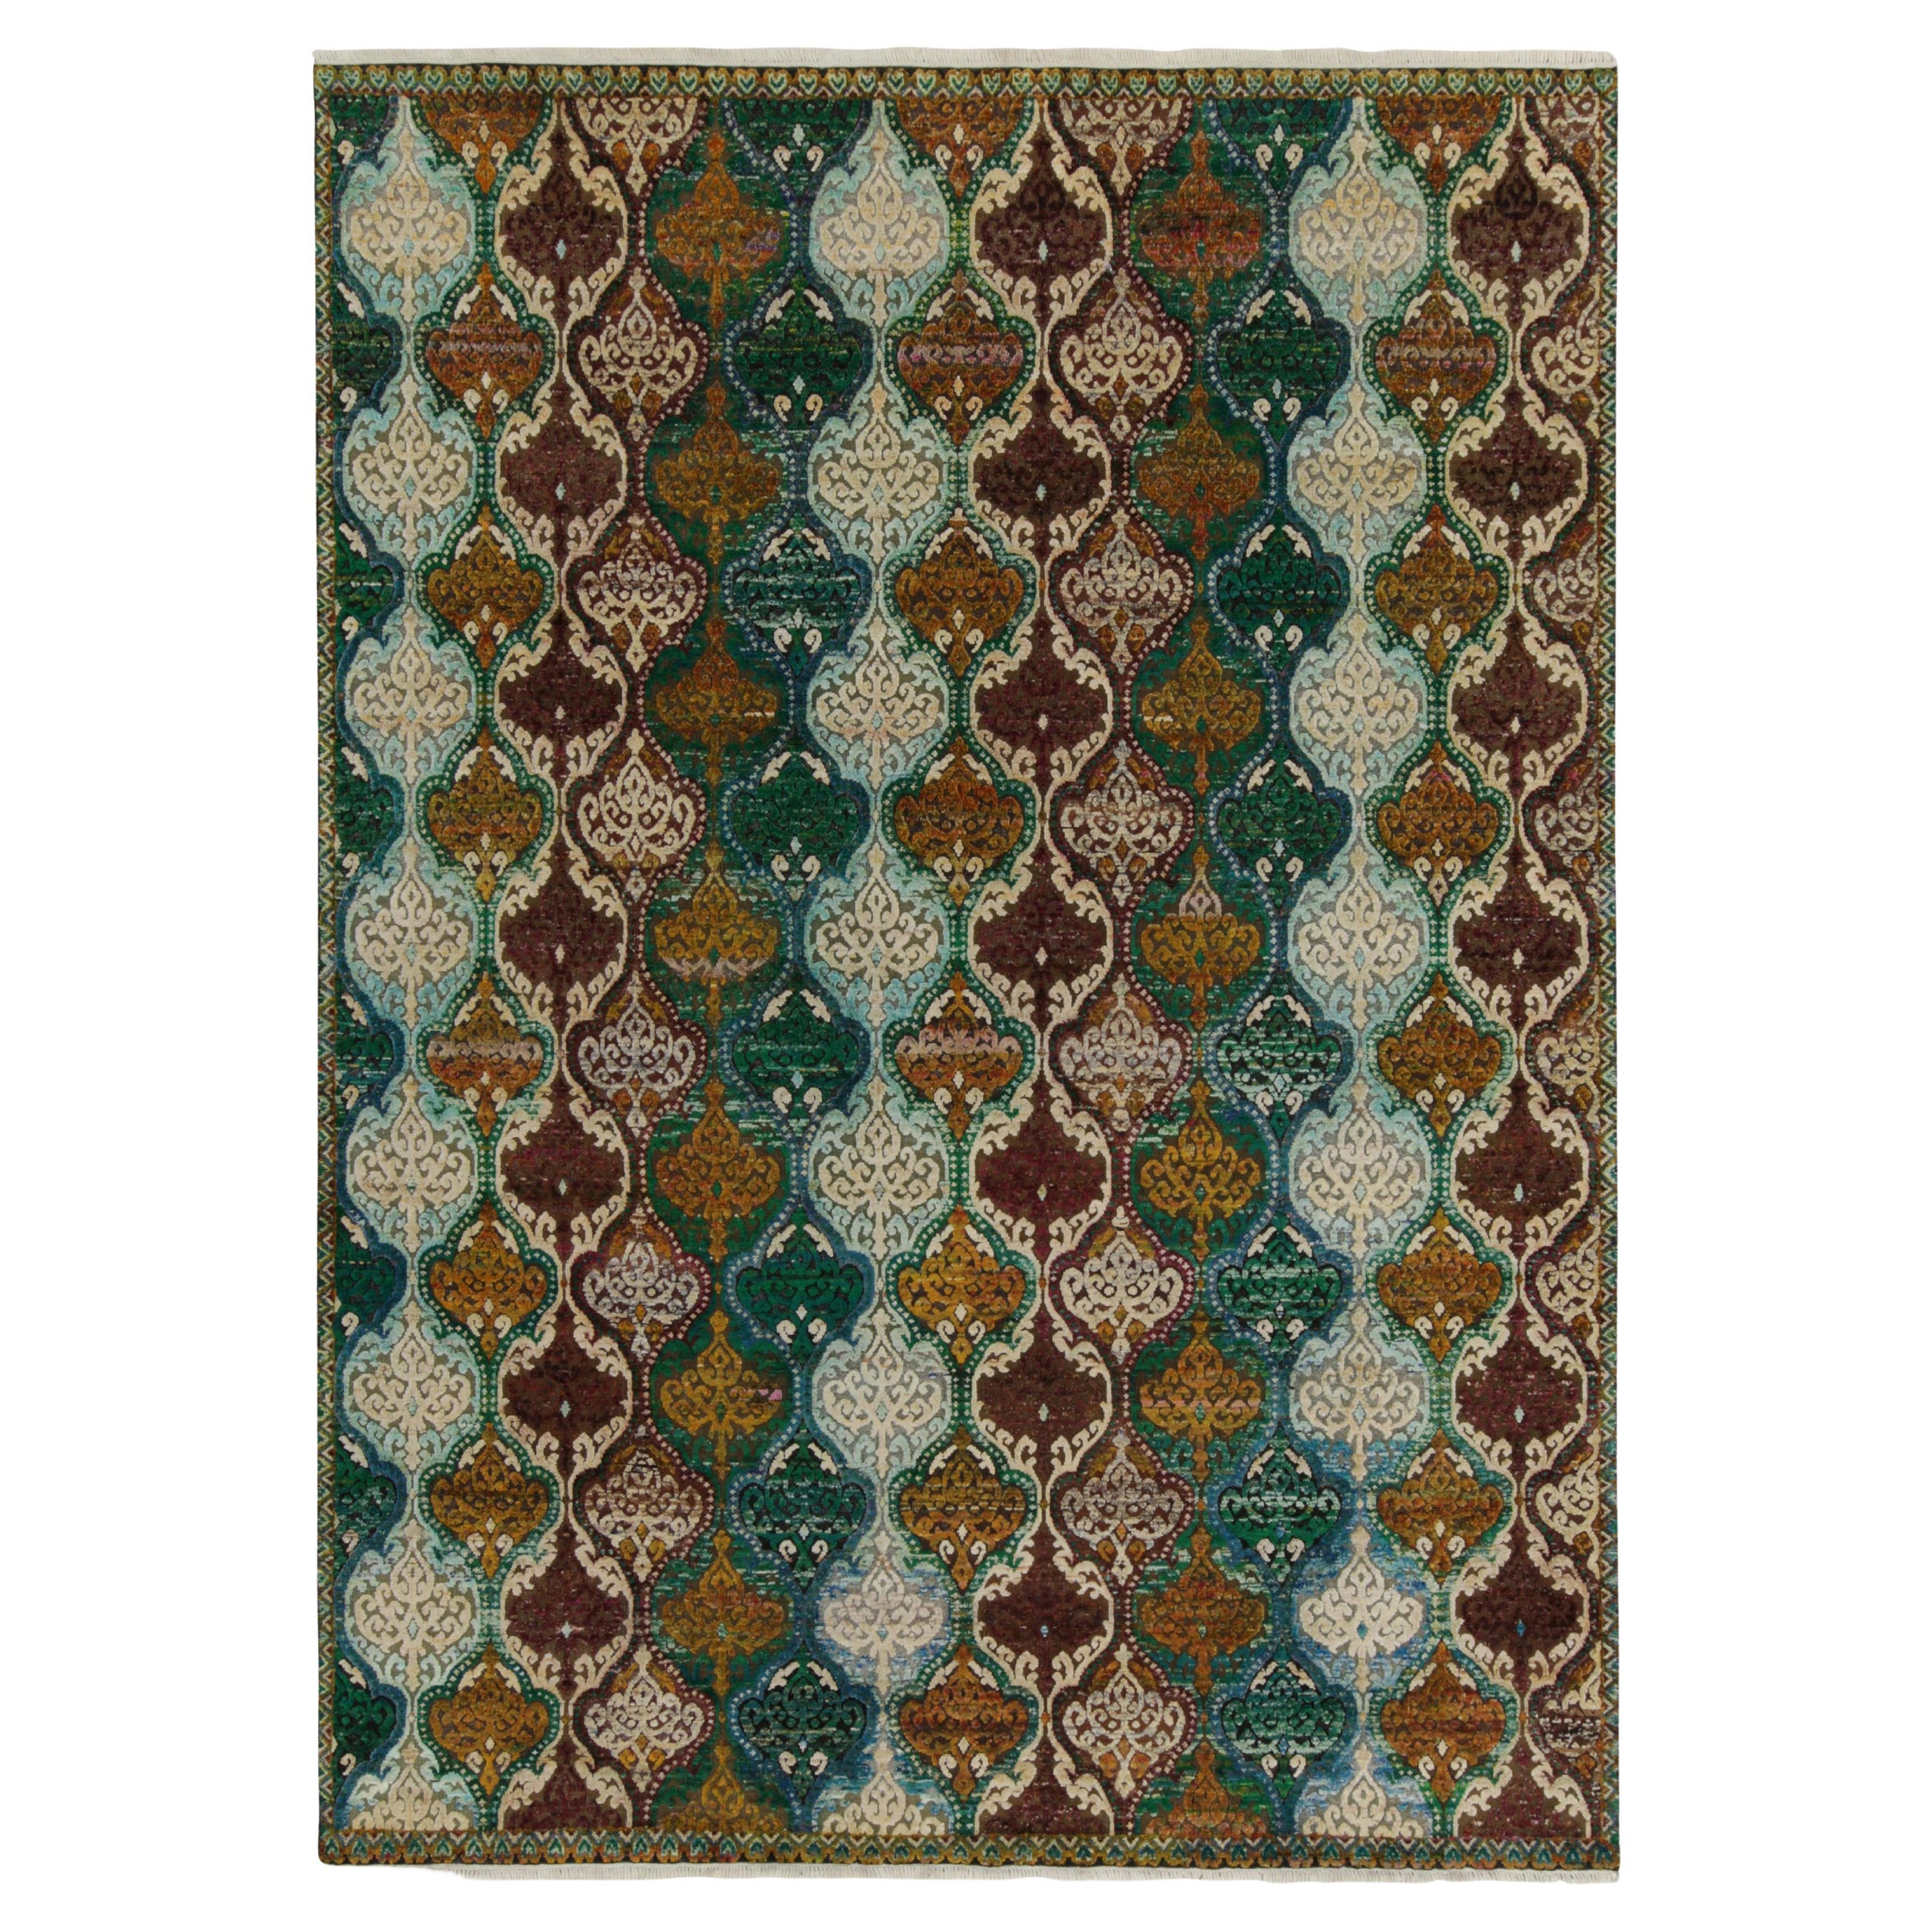 Rug & Kilim’s Classic Style Rug in Green, Gold and White Crest Patterns For Sale